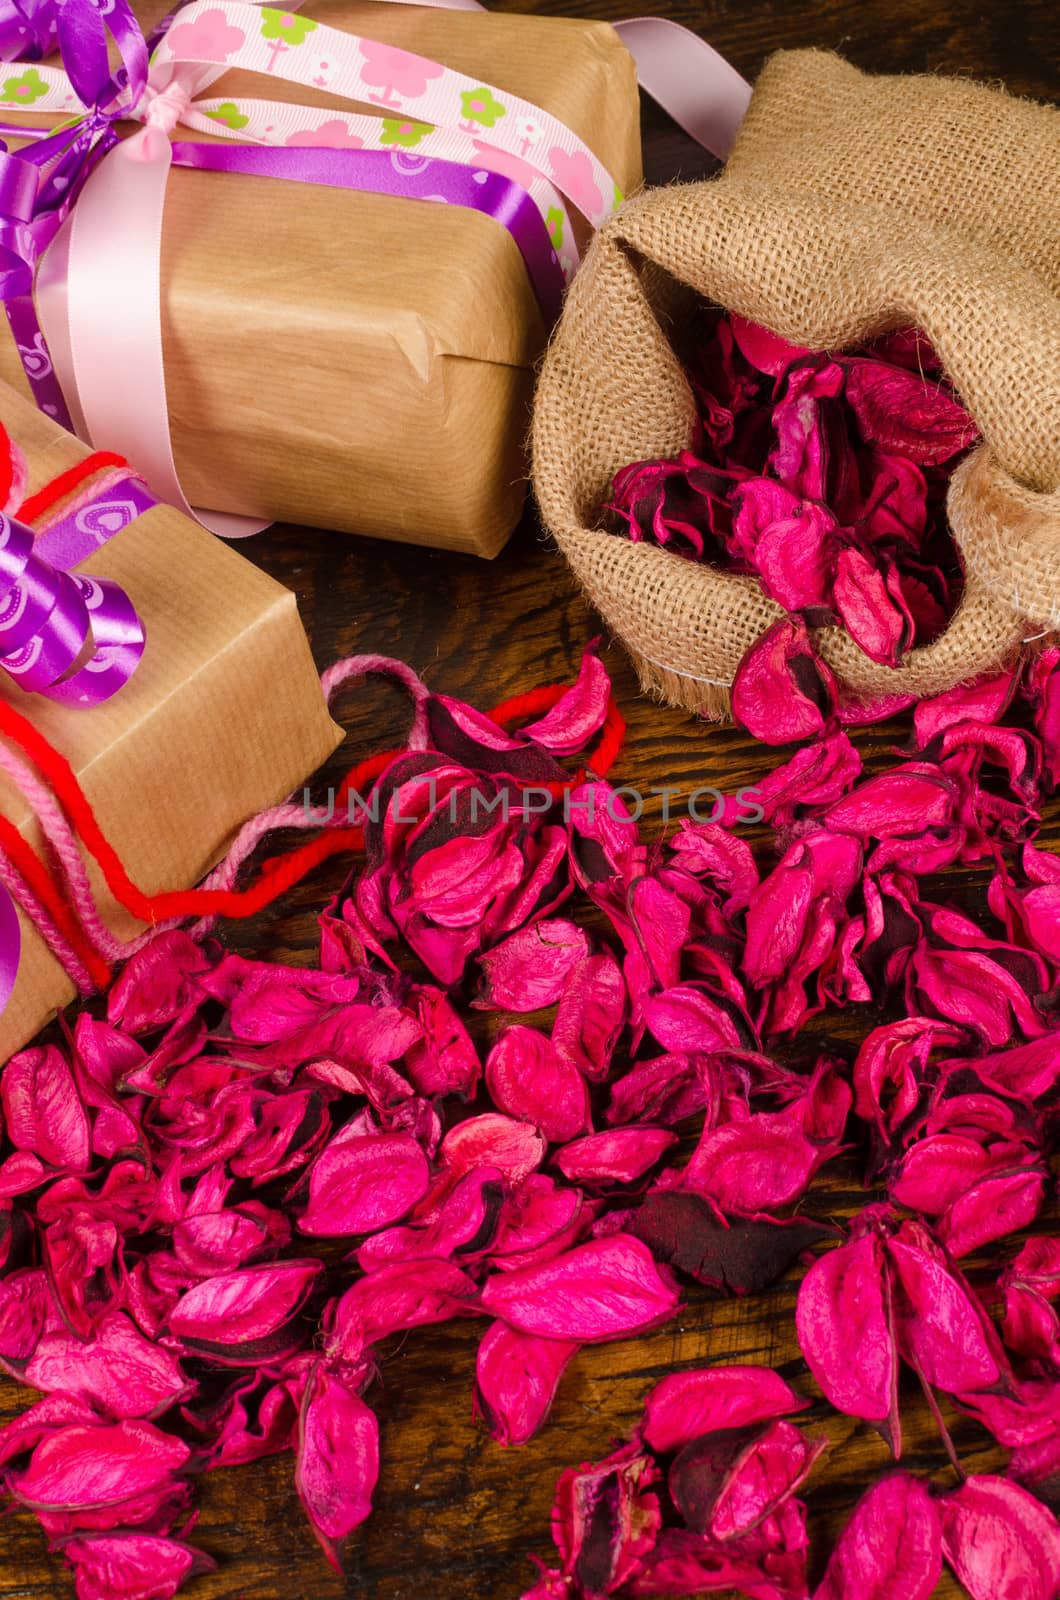 Valentine gifts surrounded by dried flower petals